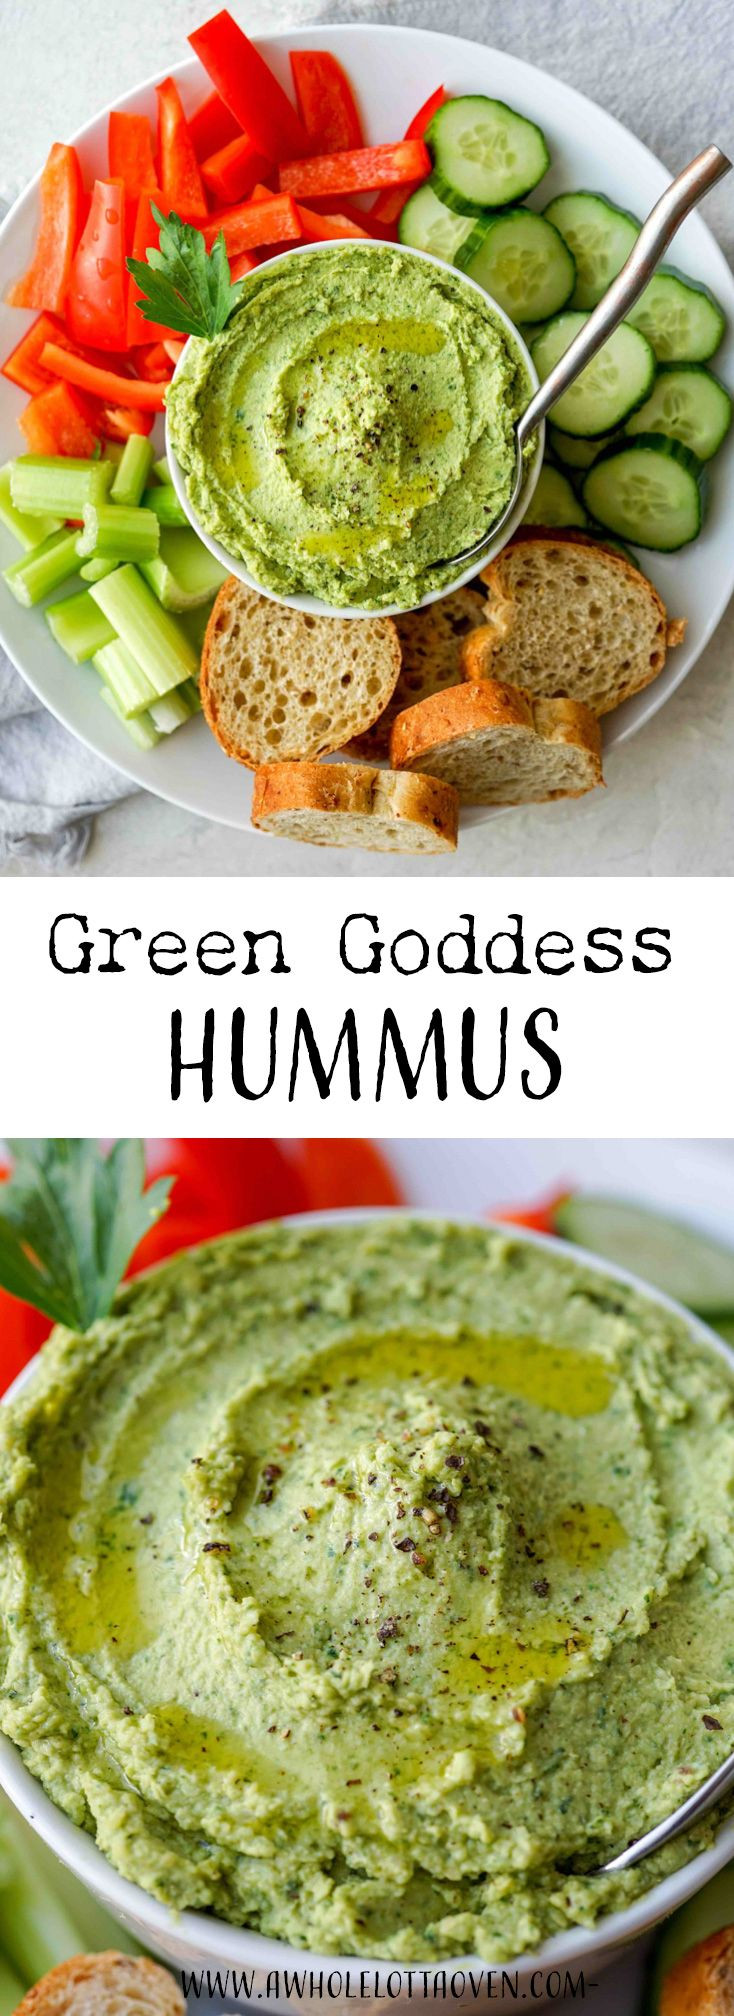 Heart Healthy Appetizers
 Green Goddess Hummus A Whole Lotta Oven